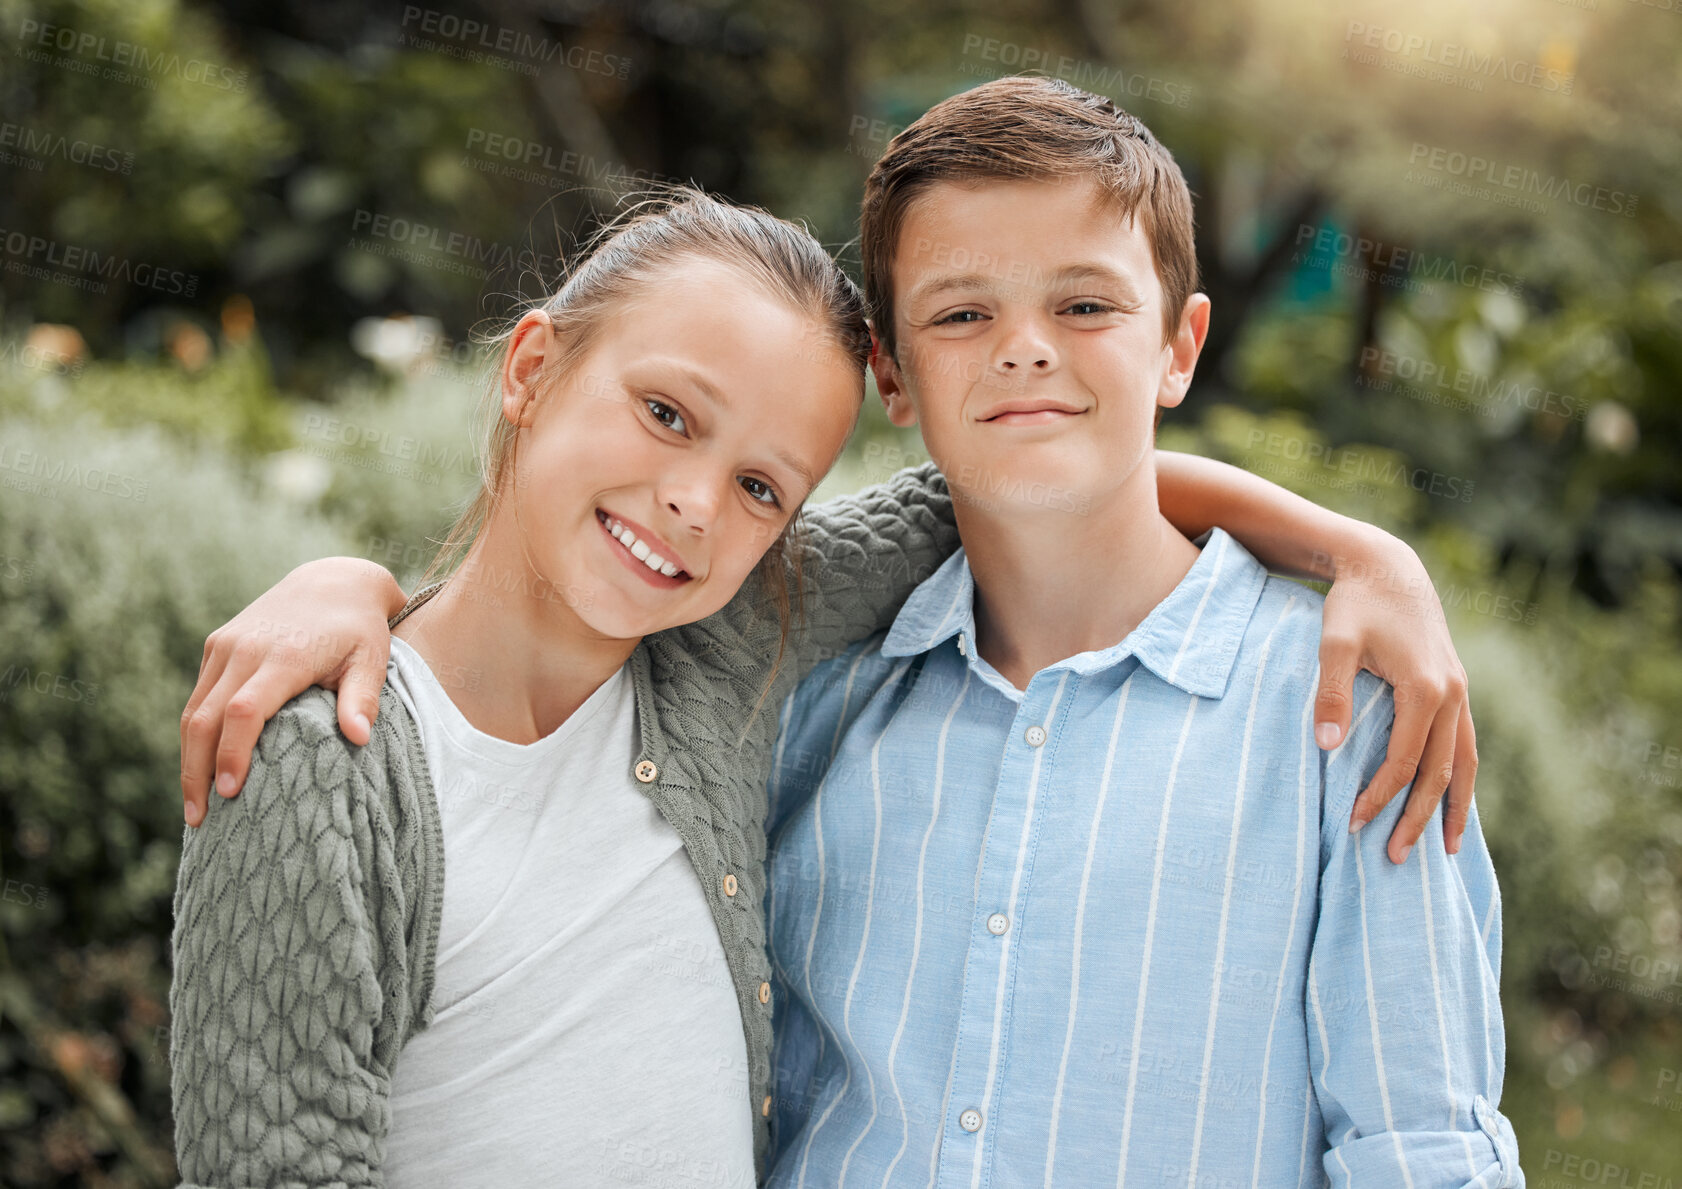 Buy stock photo Shot of two young siblings bonding while outside together